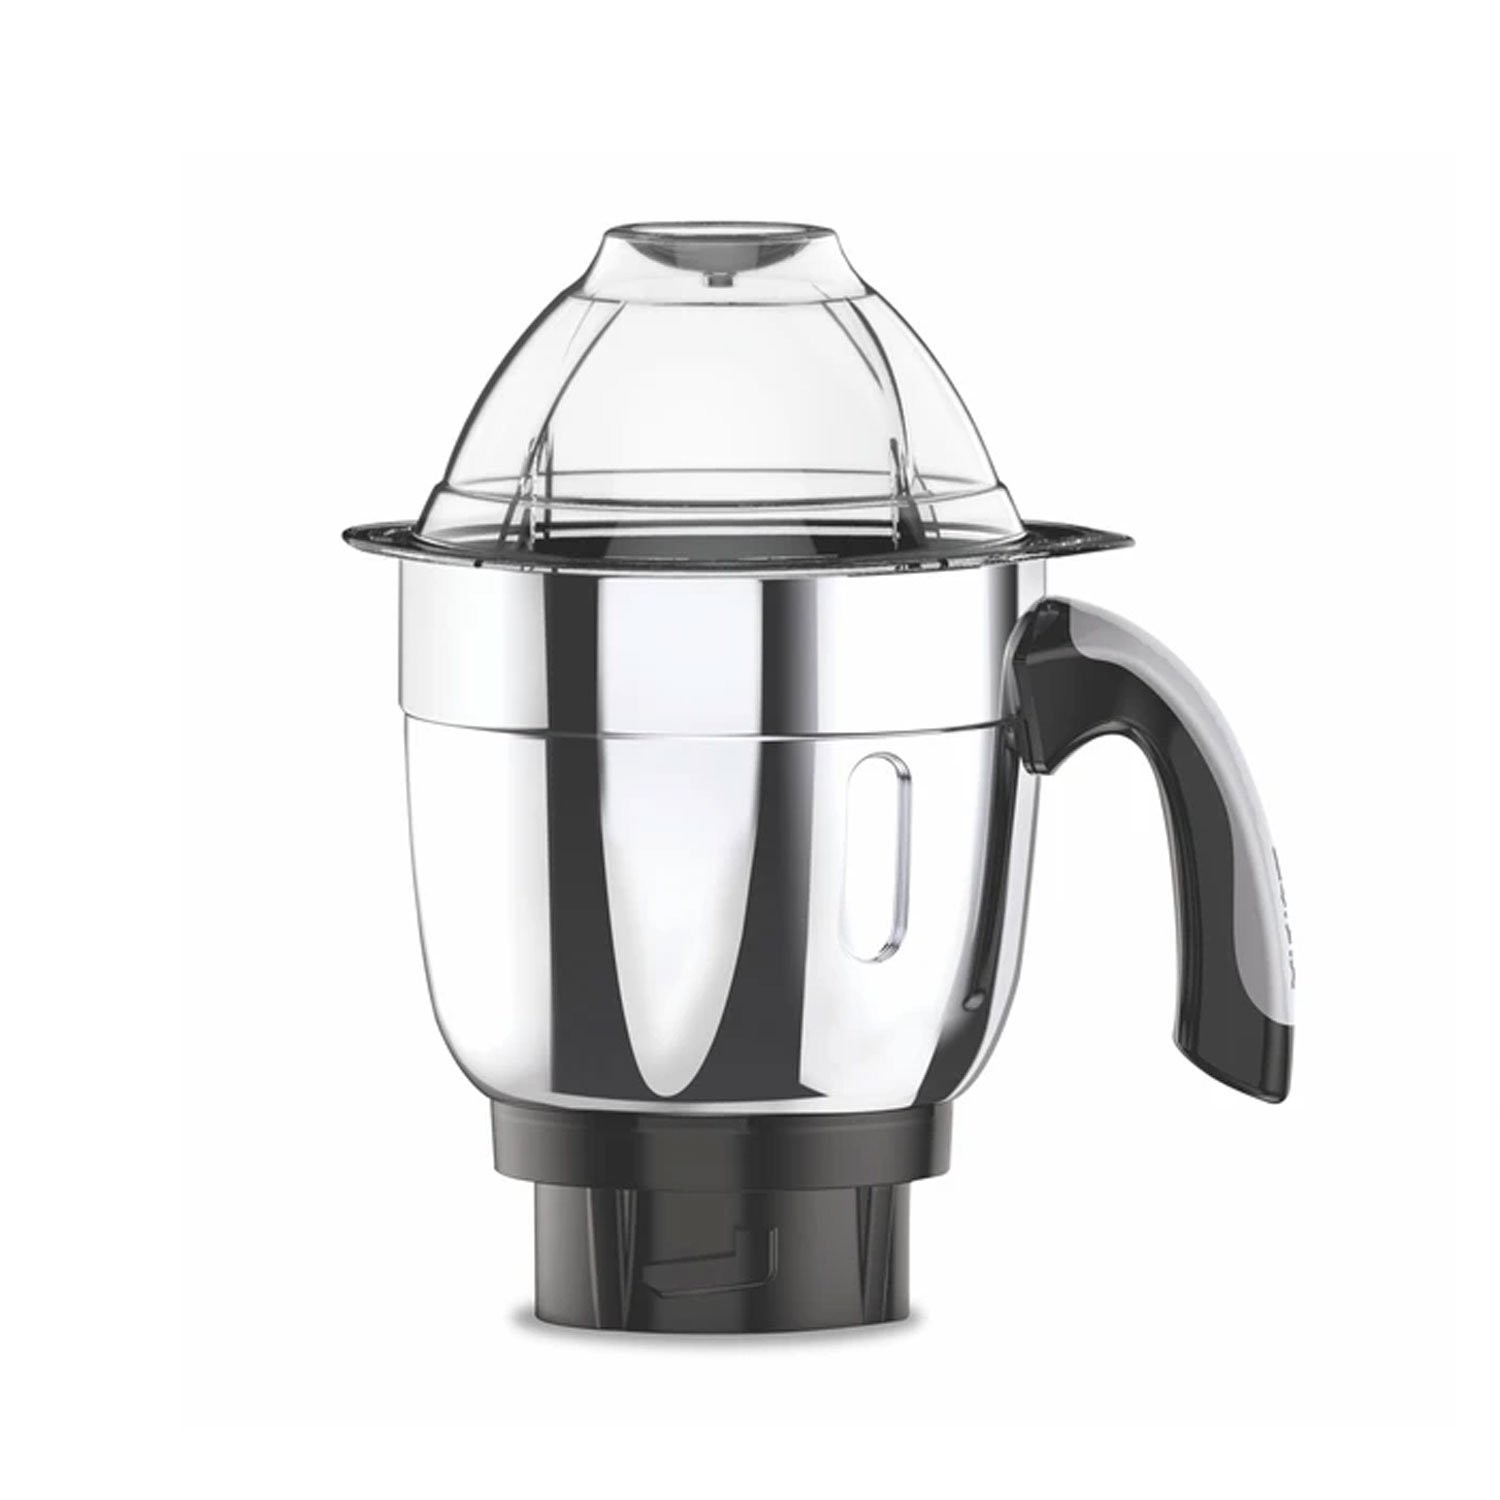 vidiem-vision-plus-650w-stainless-steel-jars-indian-mixer-grinder-with-almond-nut-milk-juice-extractor-spice-coffee-grinder-jar-110v-for-use-in-canada-usa8